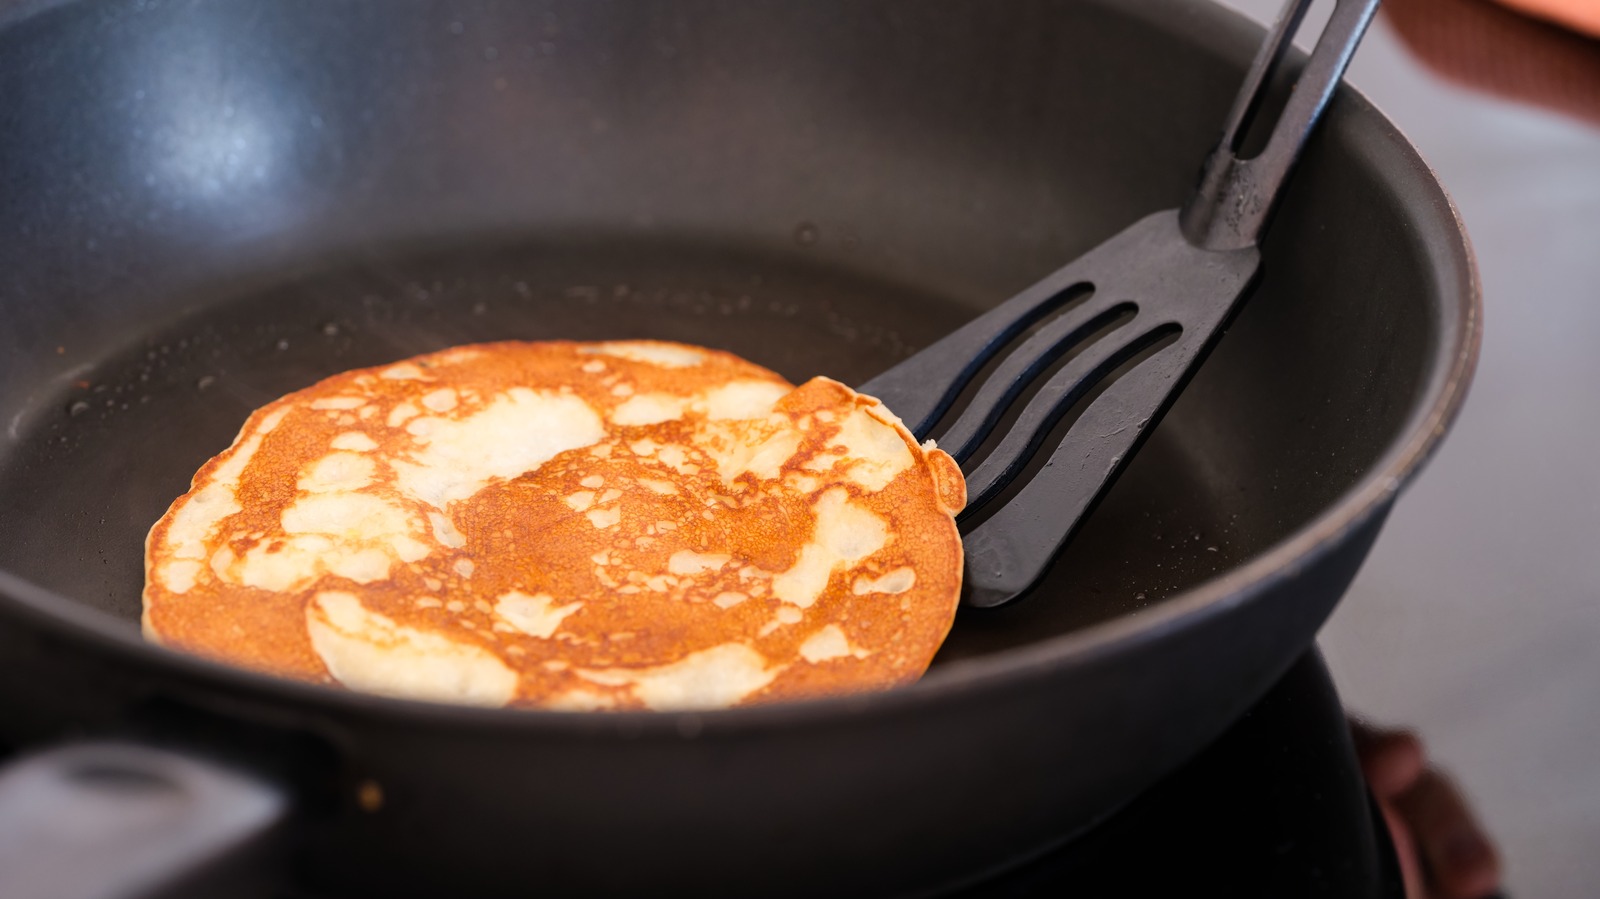 The other way to flip your crepe (if you always miss the pan)